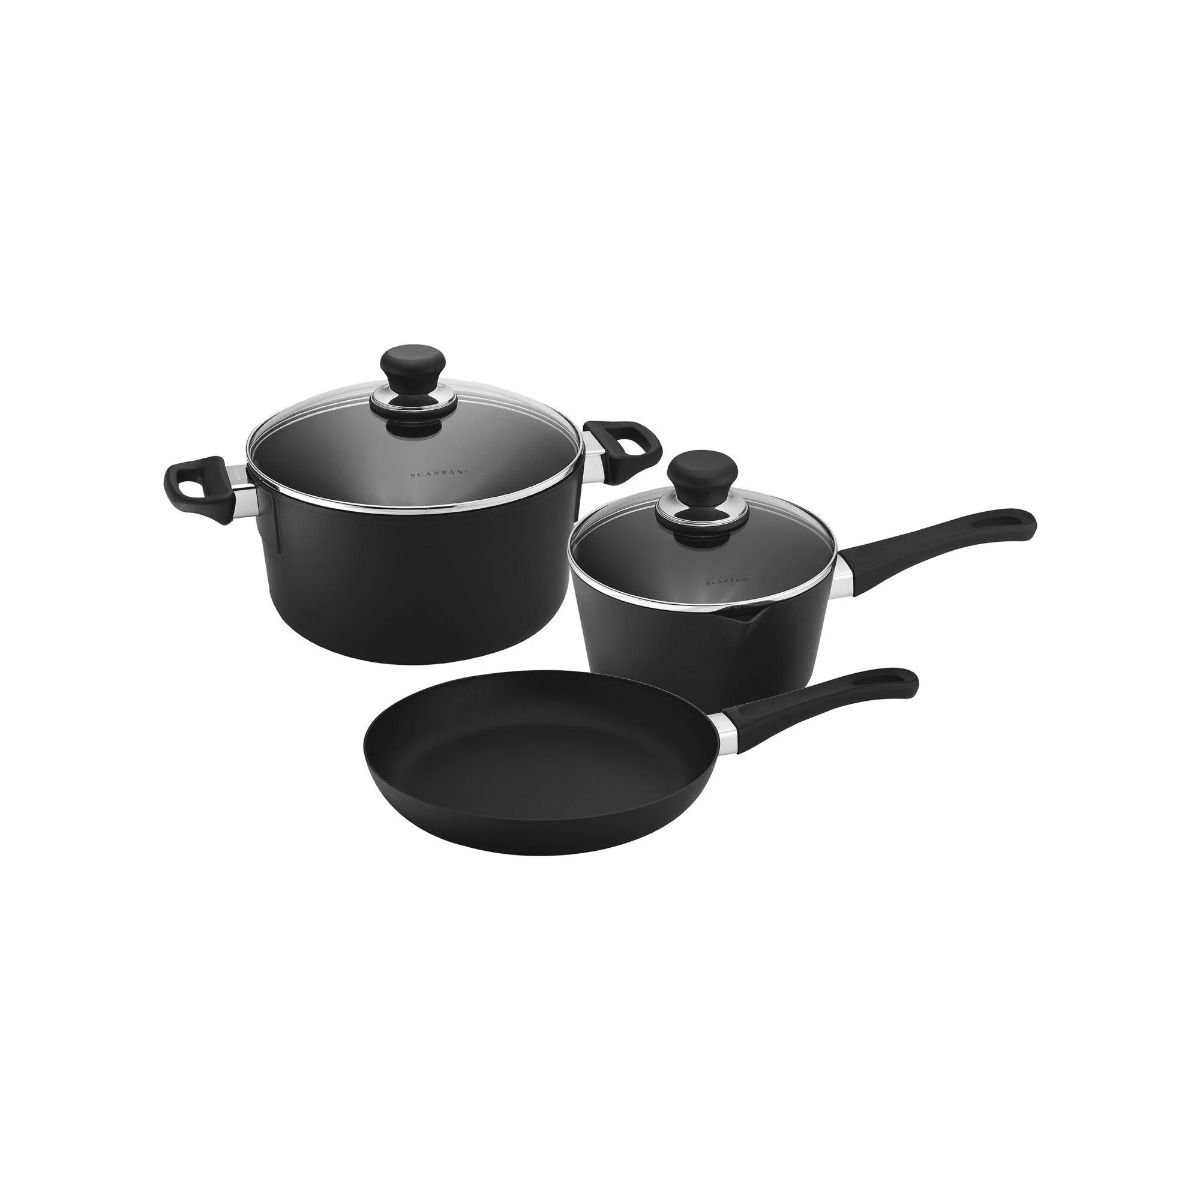 Hell's Kitchen 2 Piece Nonstick Skillet Set, Induction Ready Fry Pans